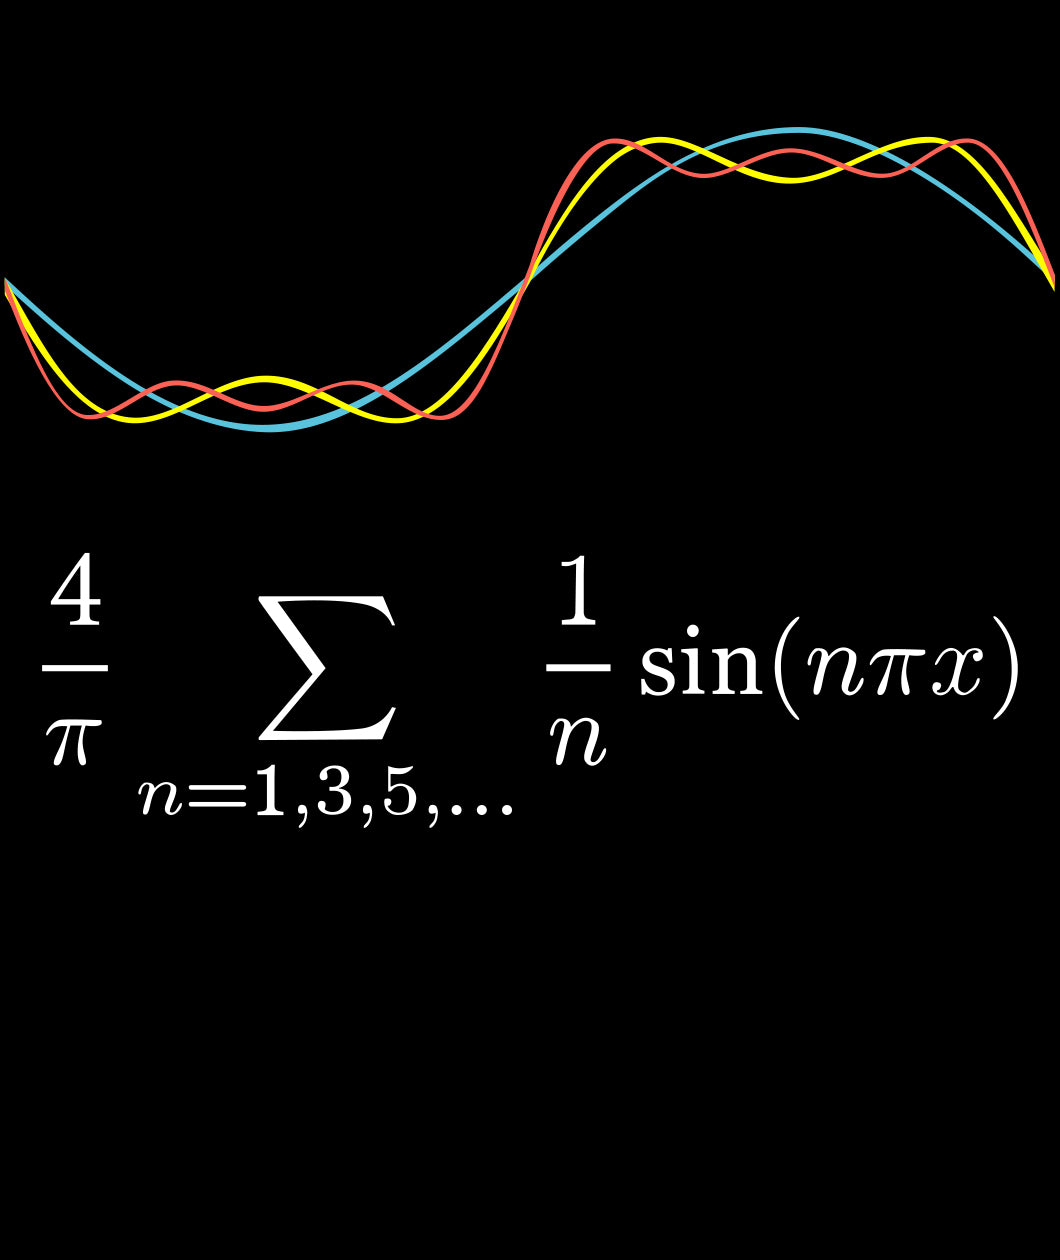 Blue, red, and yellow arching lines with a math equation below written in white - from 3Blue1Brown.